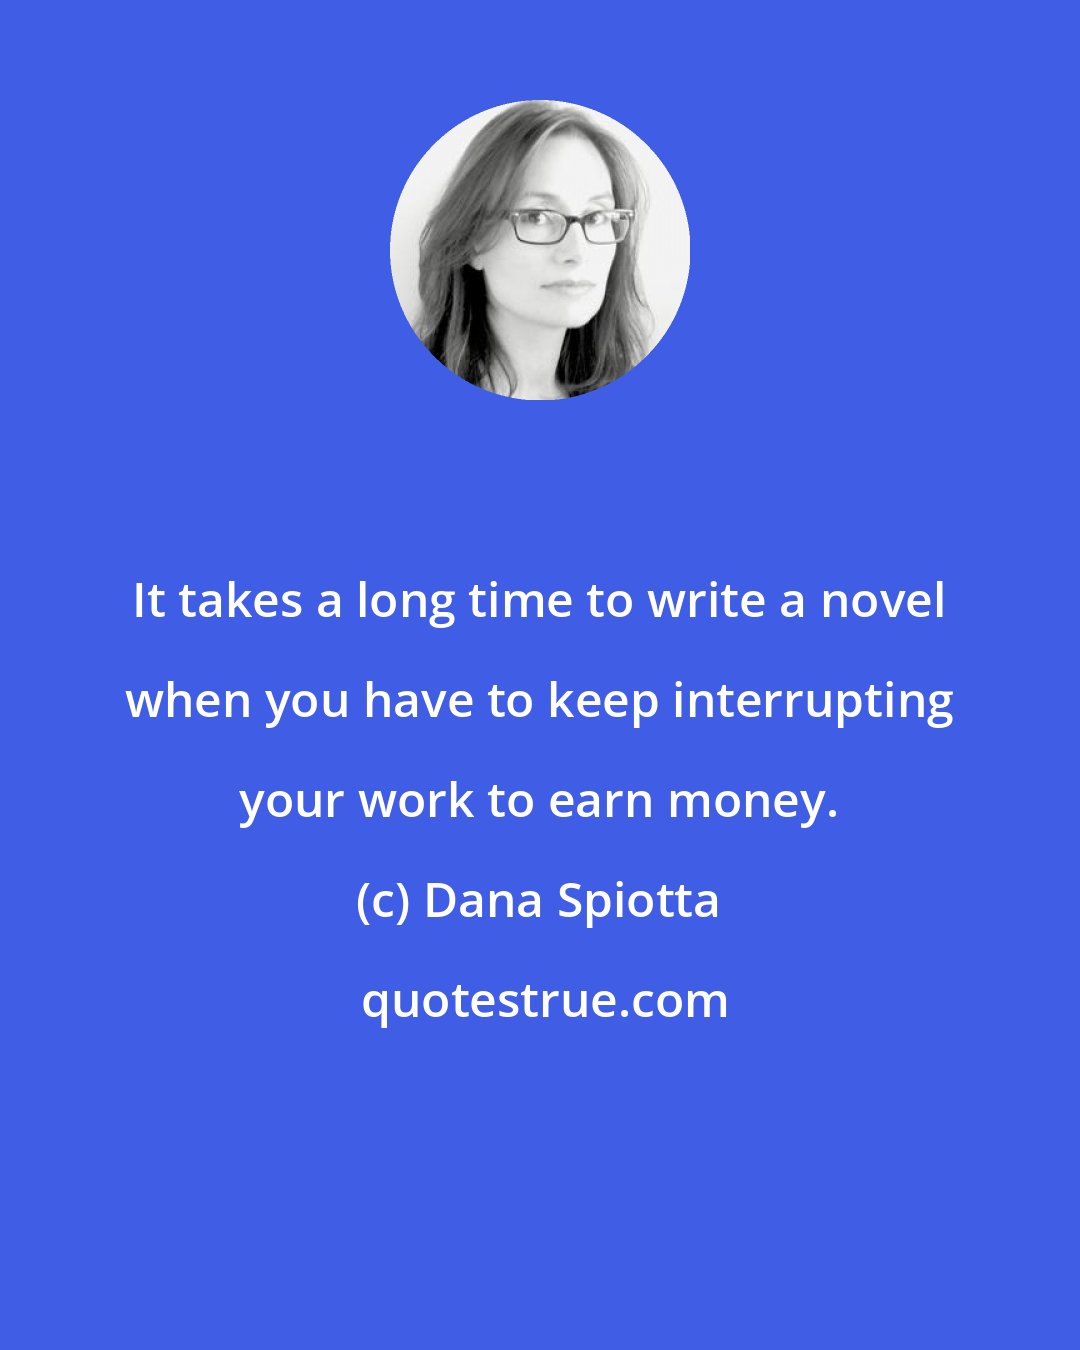 Dana Spiotta: It takes a long time to write a novel when you have to keep interrupting your work to earn money.